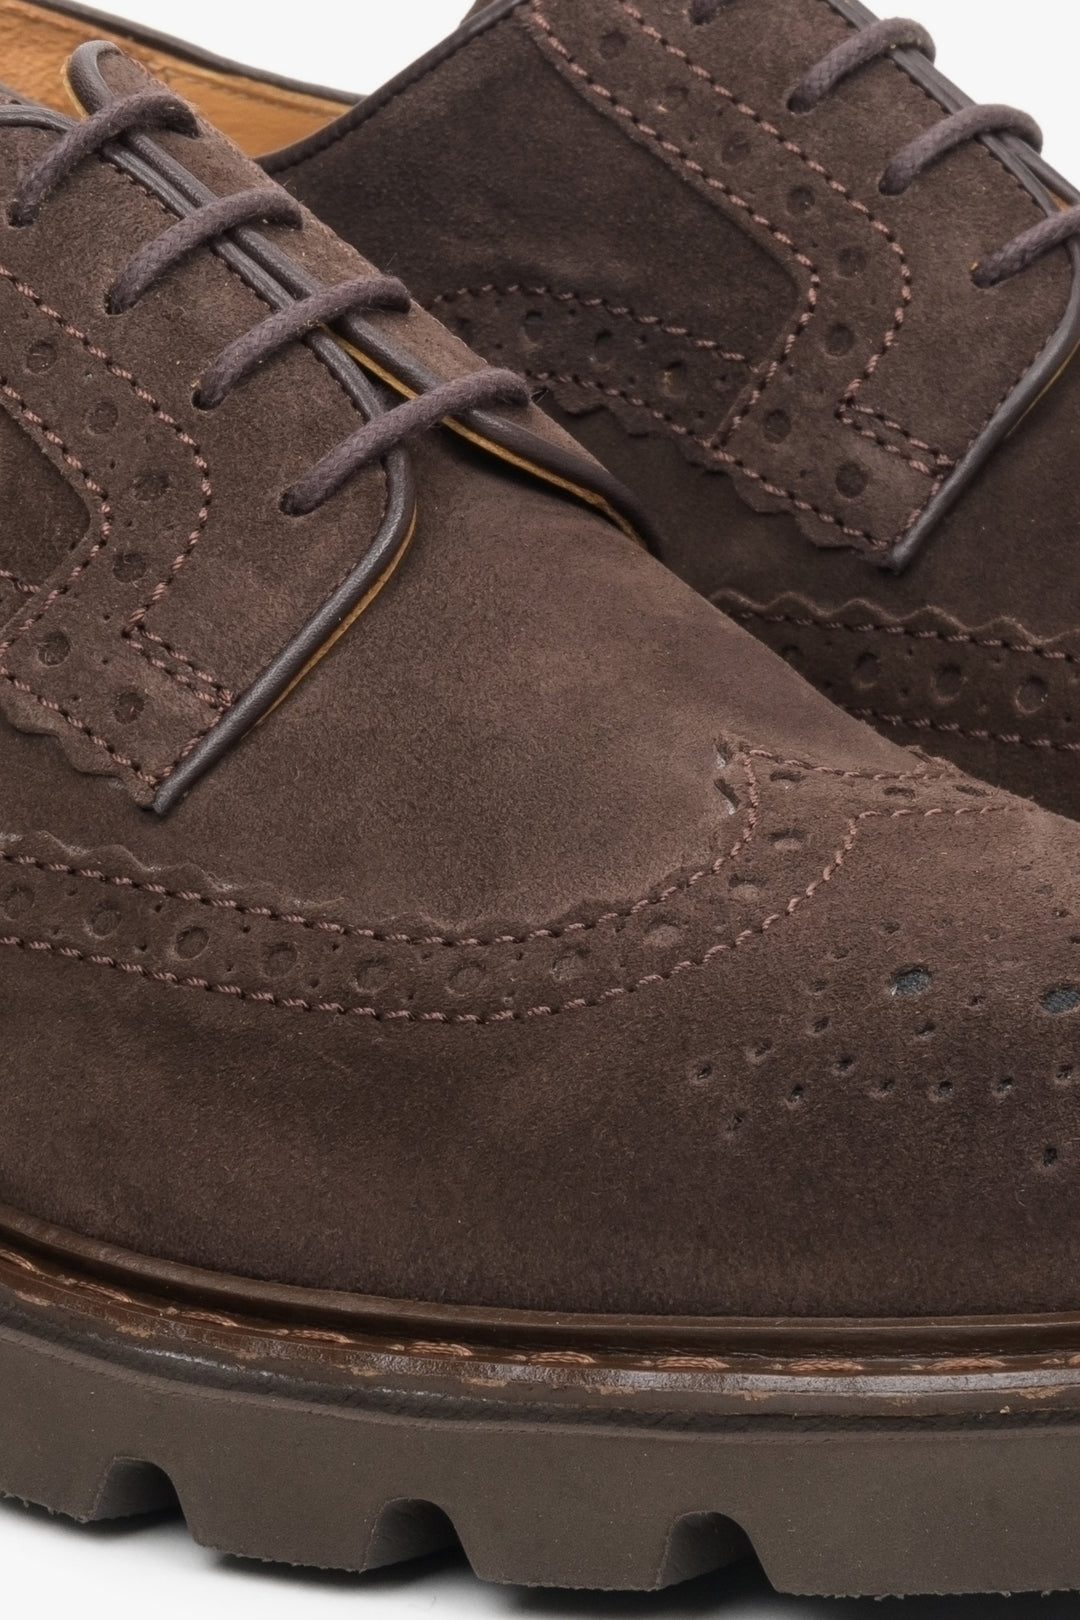 Men's dark brown brogues in genuine suede by Estro - close-up on the details.